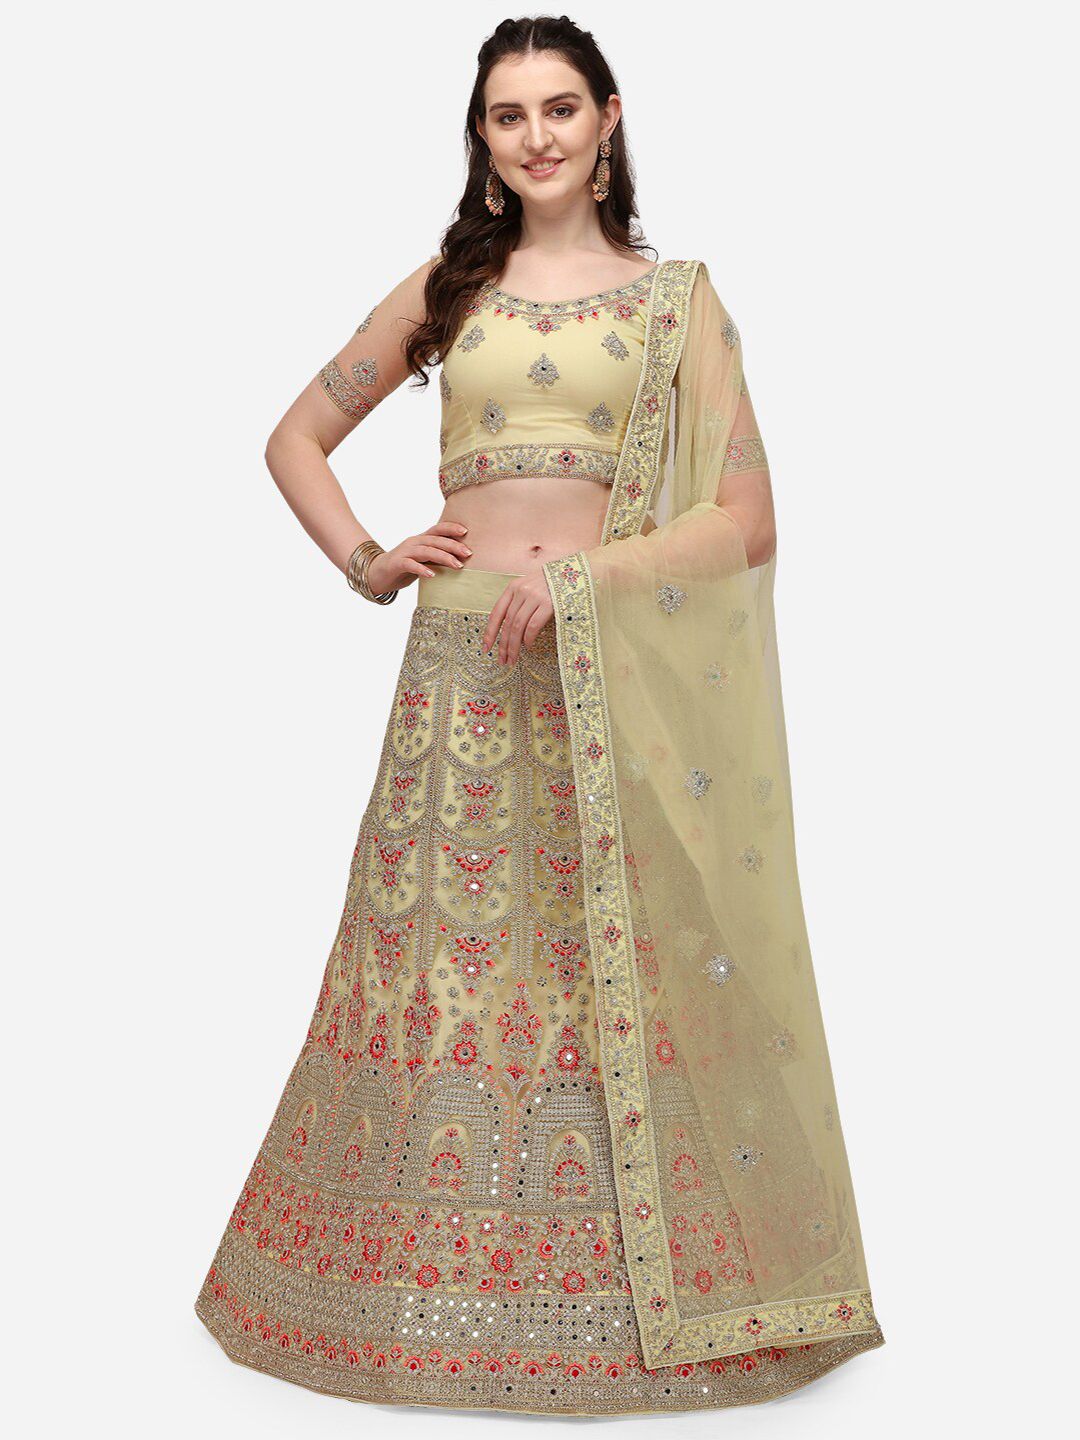 VRSALES Cream-Coloured Embroidered Semi-Stitched Lehenga & Unstitched Choli with Dupatta Price in India